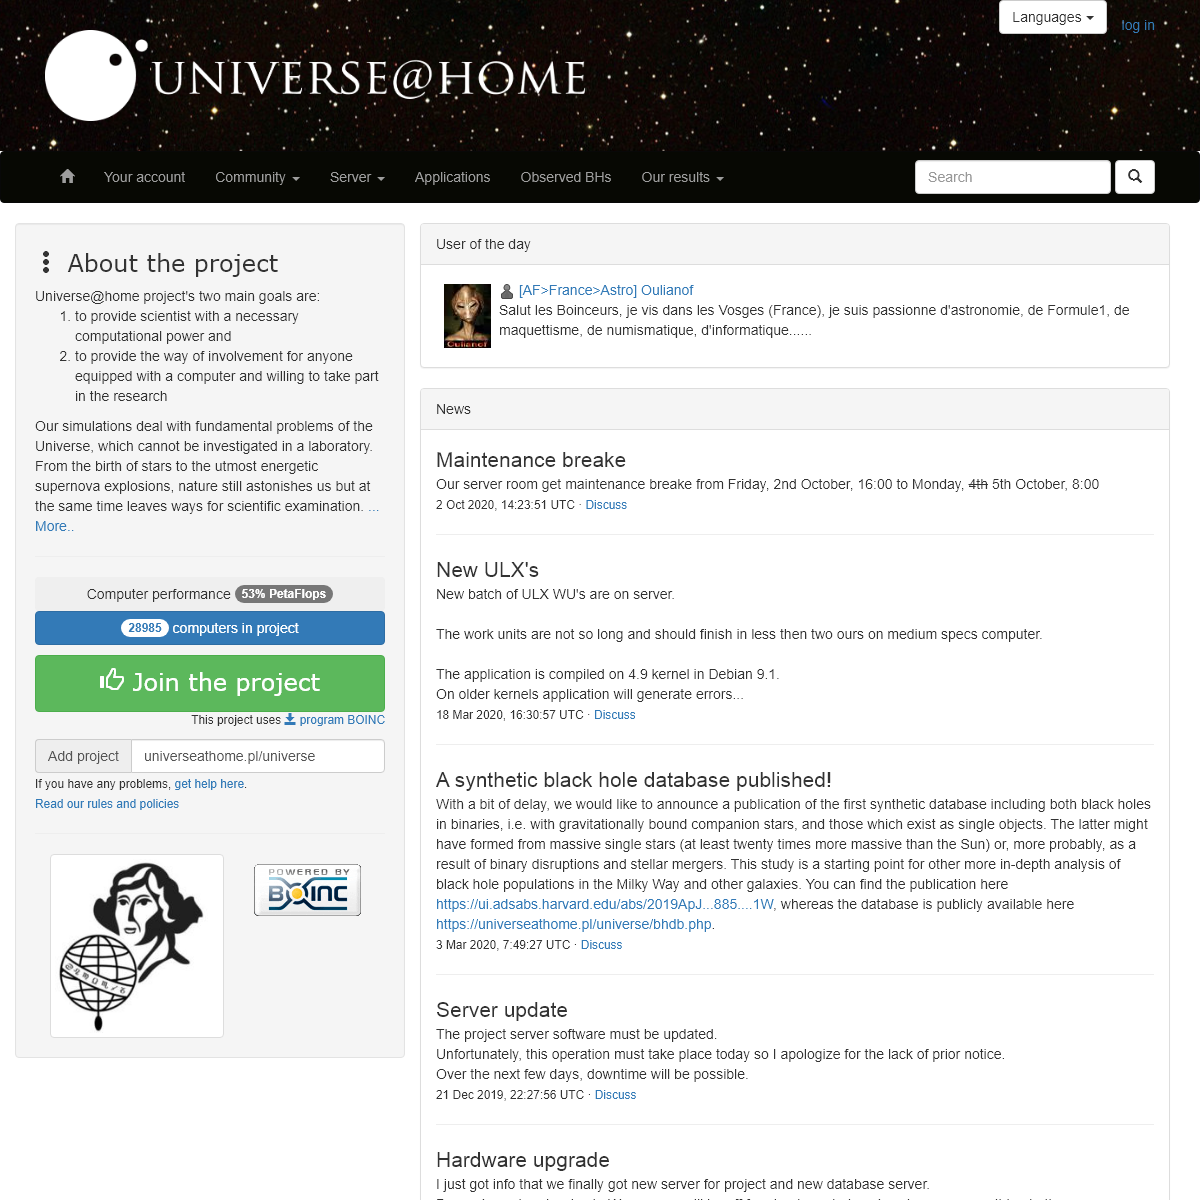 A complete backup of universeathome.pl